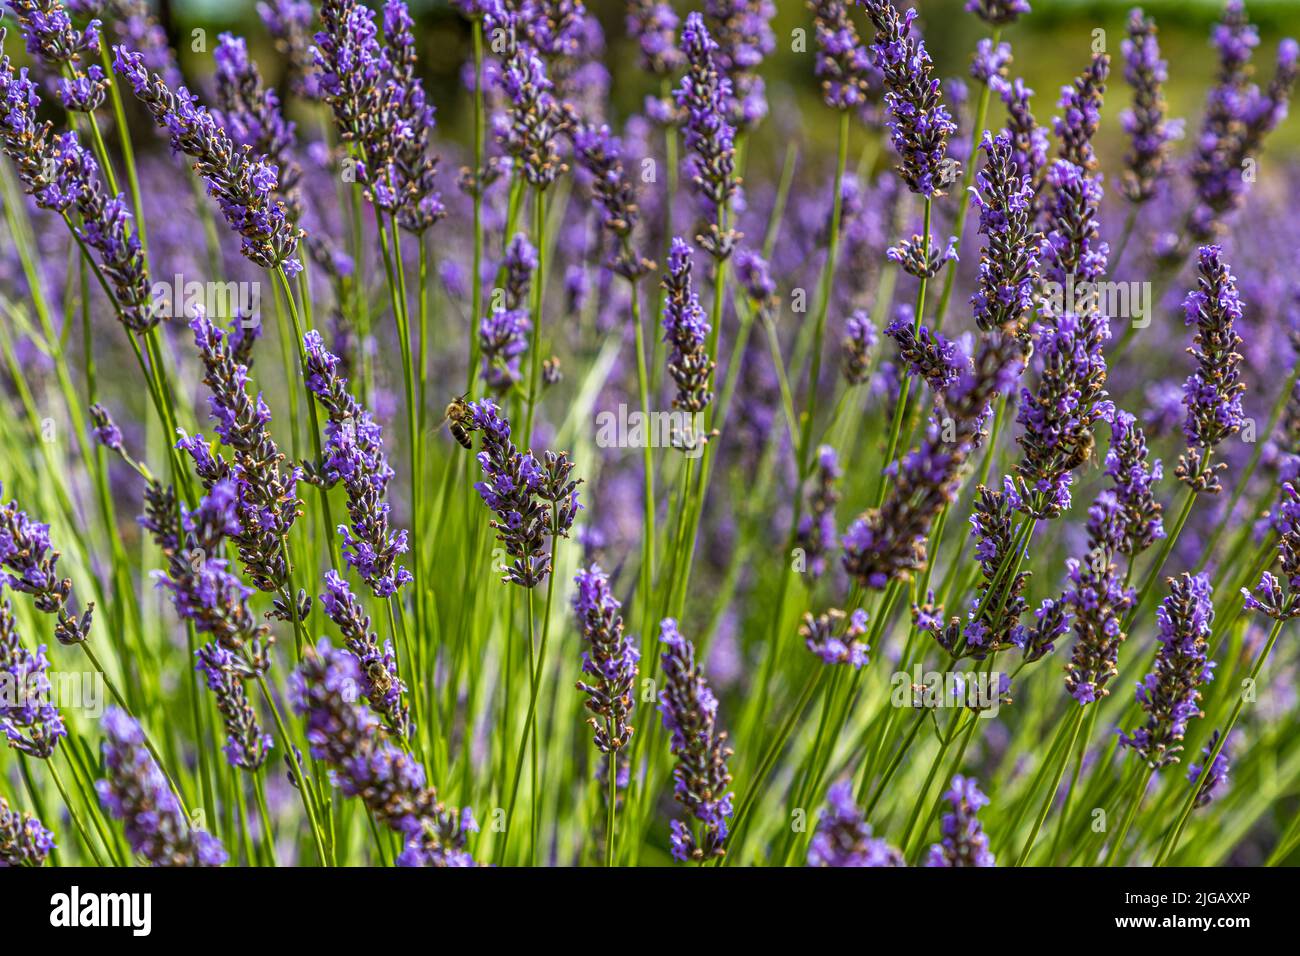 Lavandin is a hybrid lavender from a cross between the spirea lavender (Lavandula latifolia) and the true lavender (Lavandula angustifolia). This cross was not created by man, but accidentally by insect pollination, and was first discovered in 1930. Lavandin is more productive and therefore gradually displaces the true lavender from cultivation Stock Photo